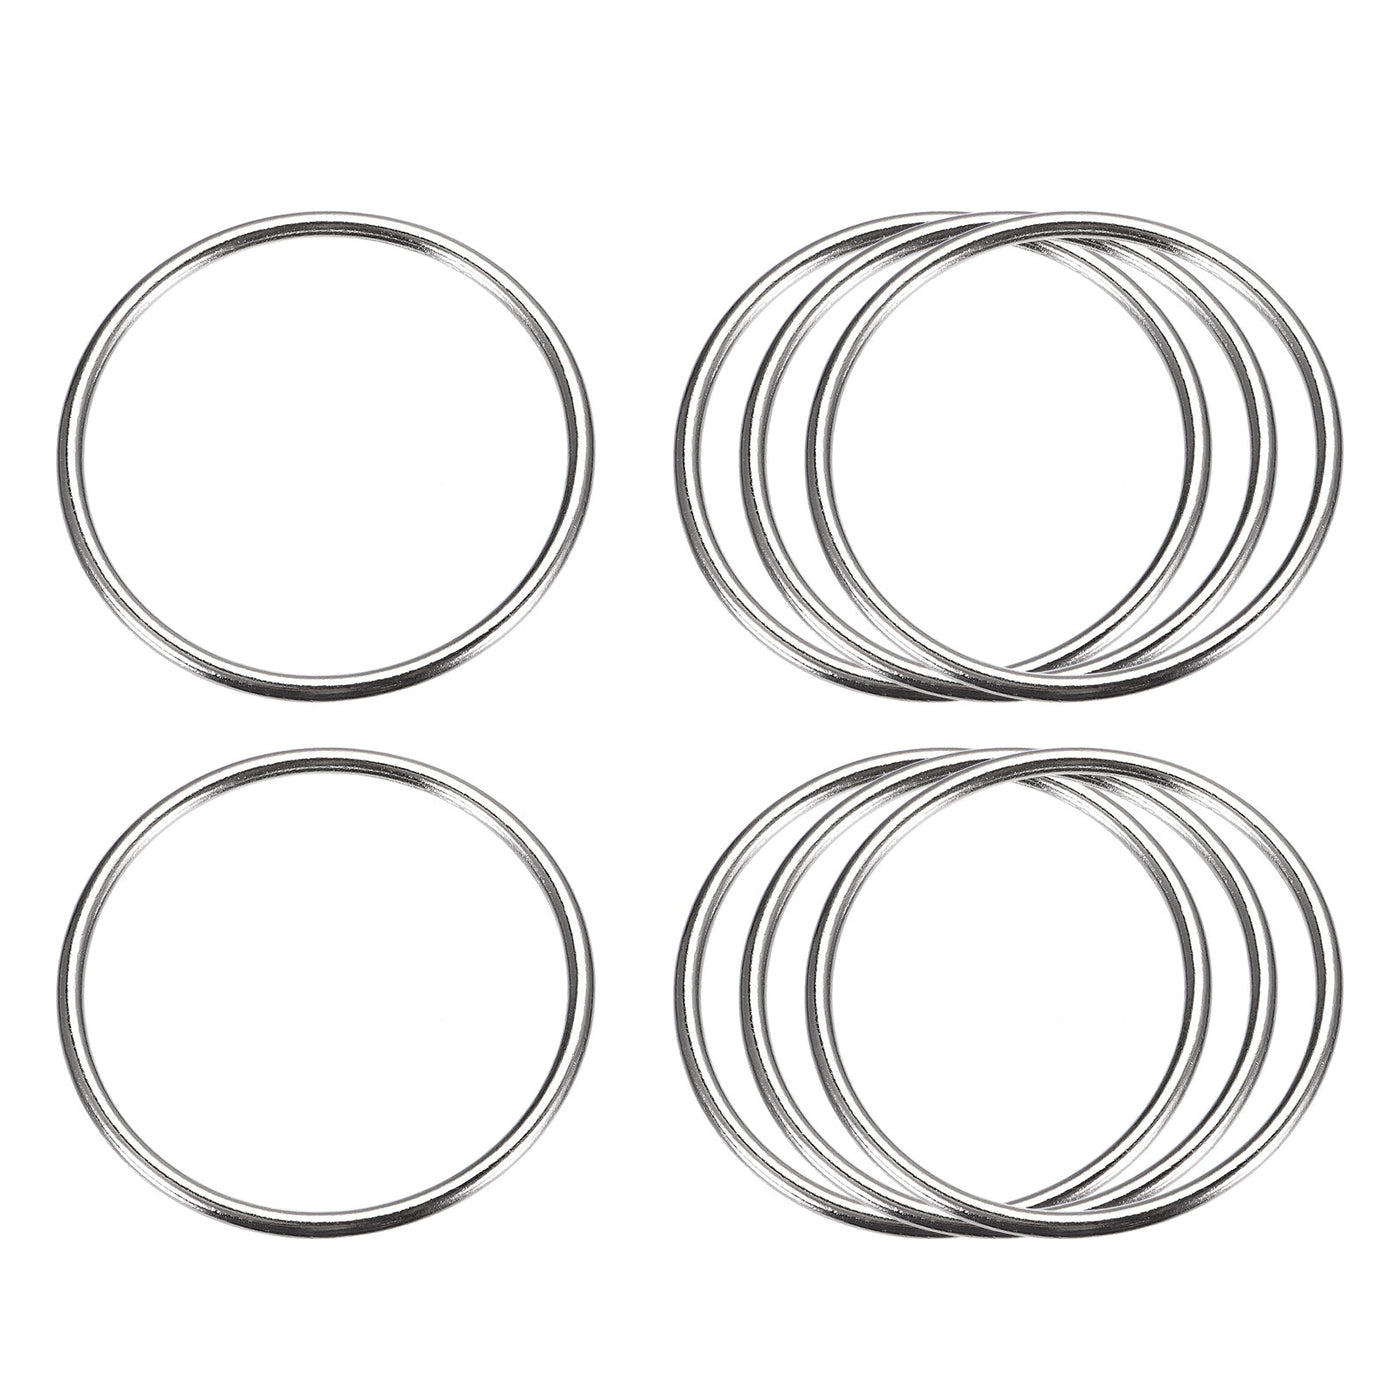 uxcell Uxcell Metal O Rings, 8pcs 50mm(1.97") ID 3mm Thick Welded O-Ringe, Silver Tone